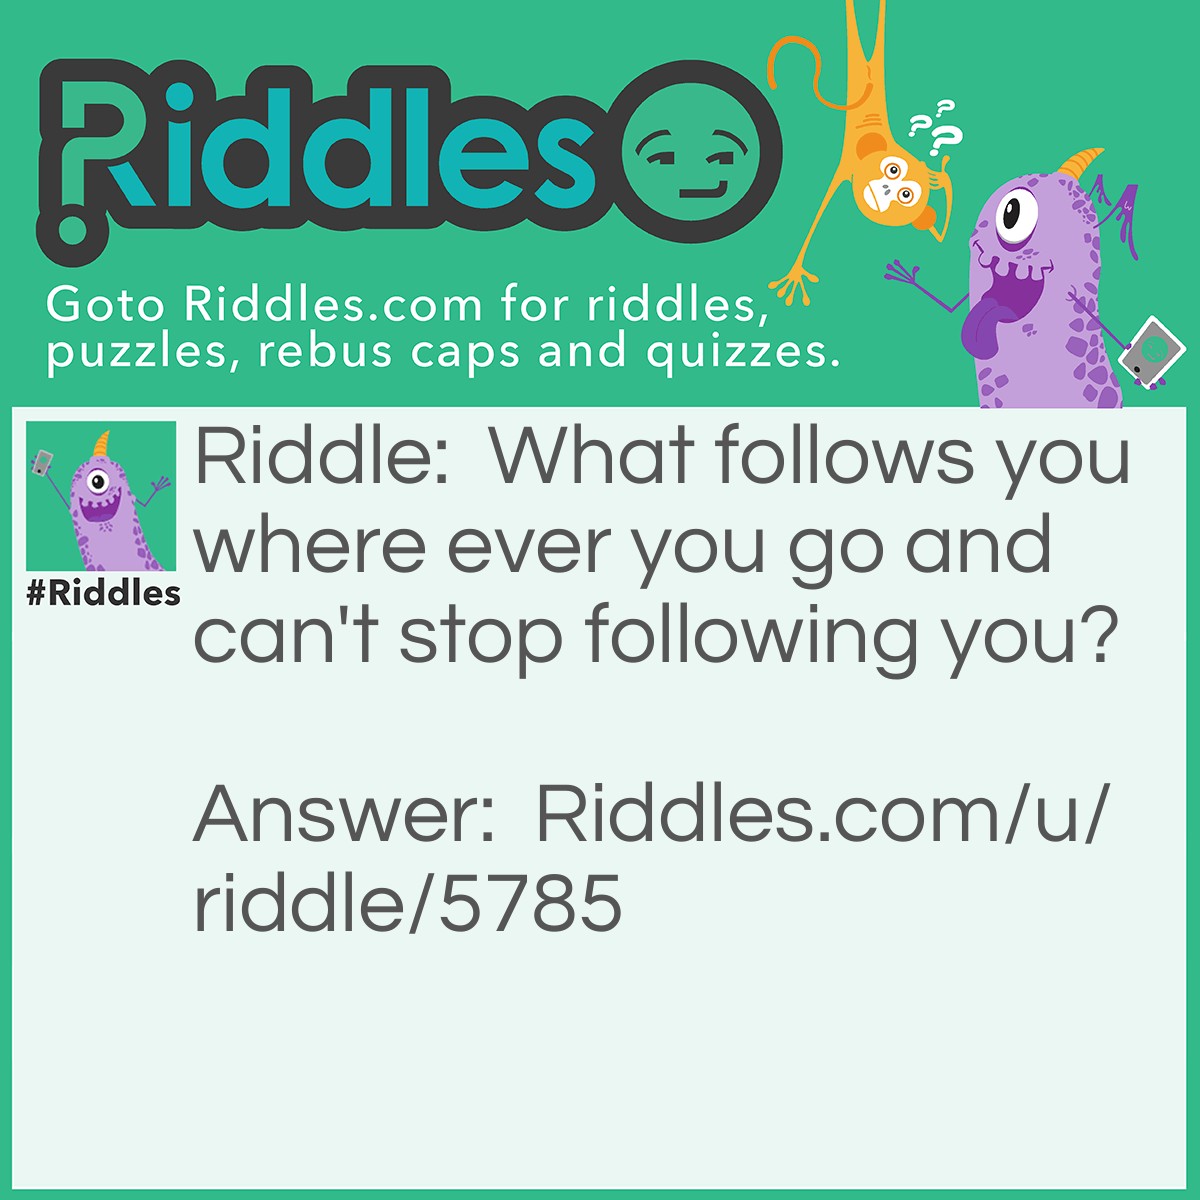 Riddle: What follows you where ever you go and can't stop following you? Answer: Your shadow.